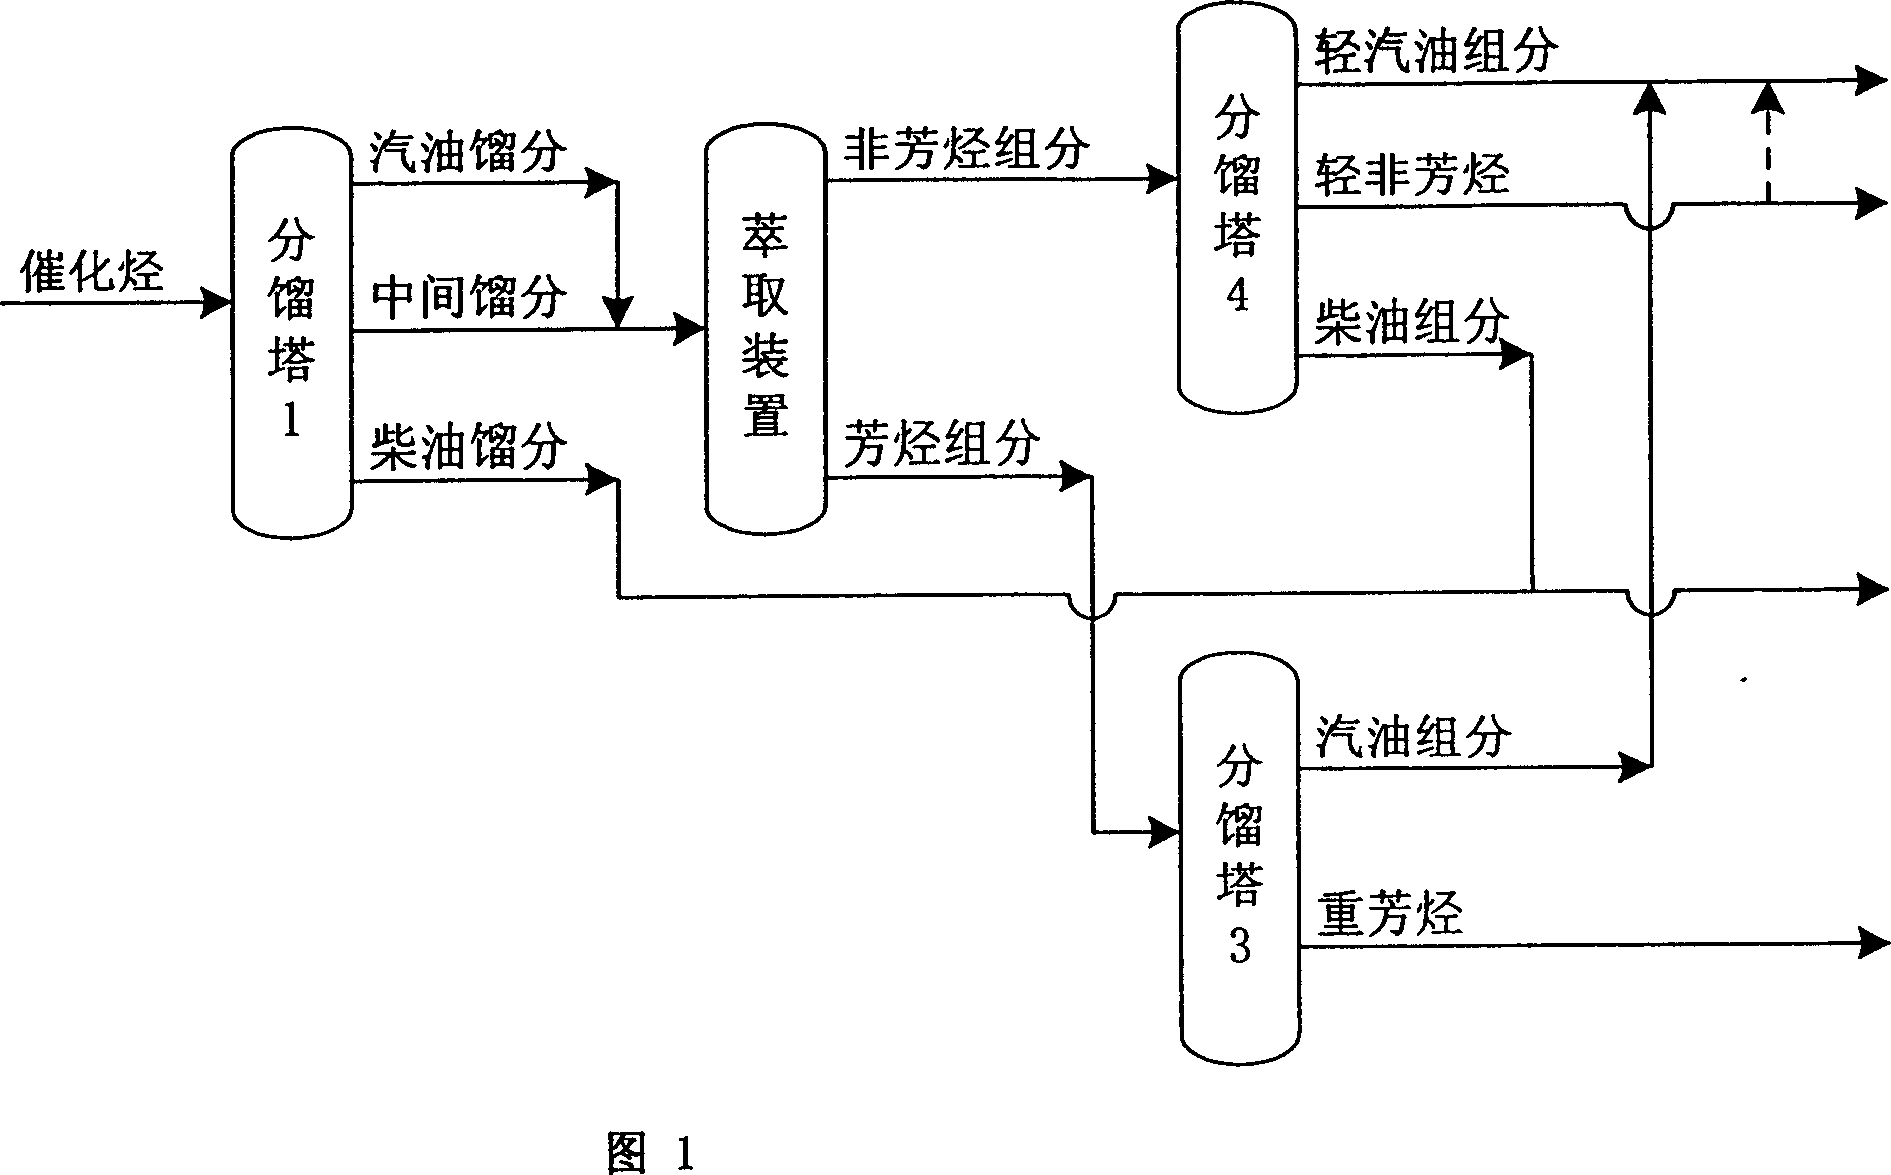 Catalytic hydrocarbon recombinant treating method